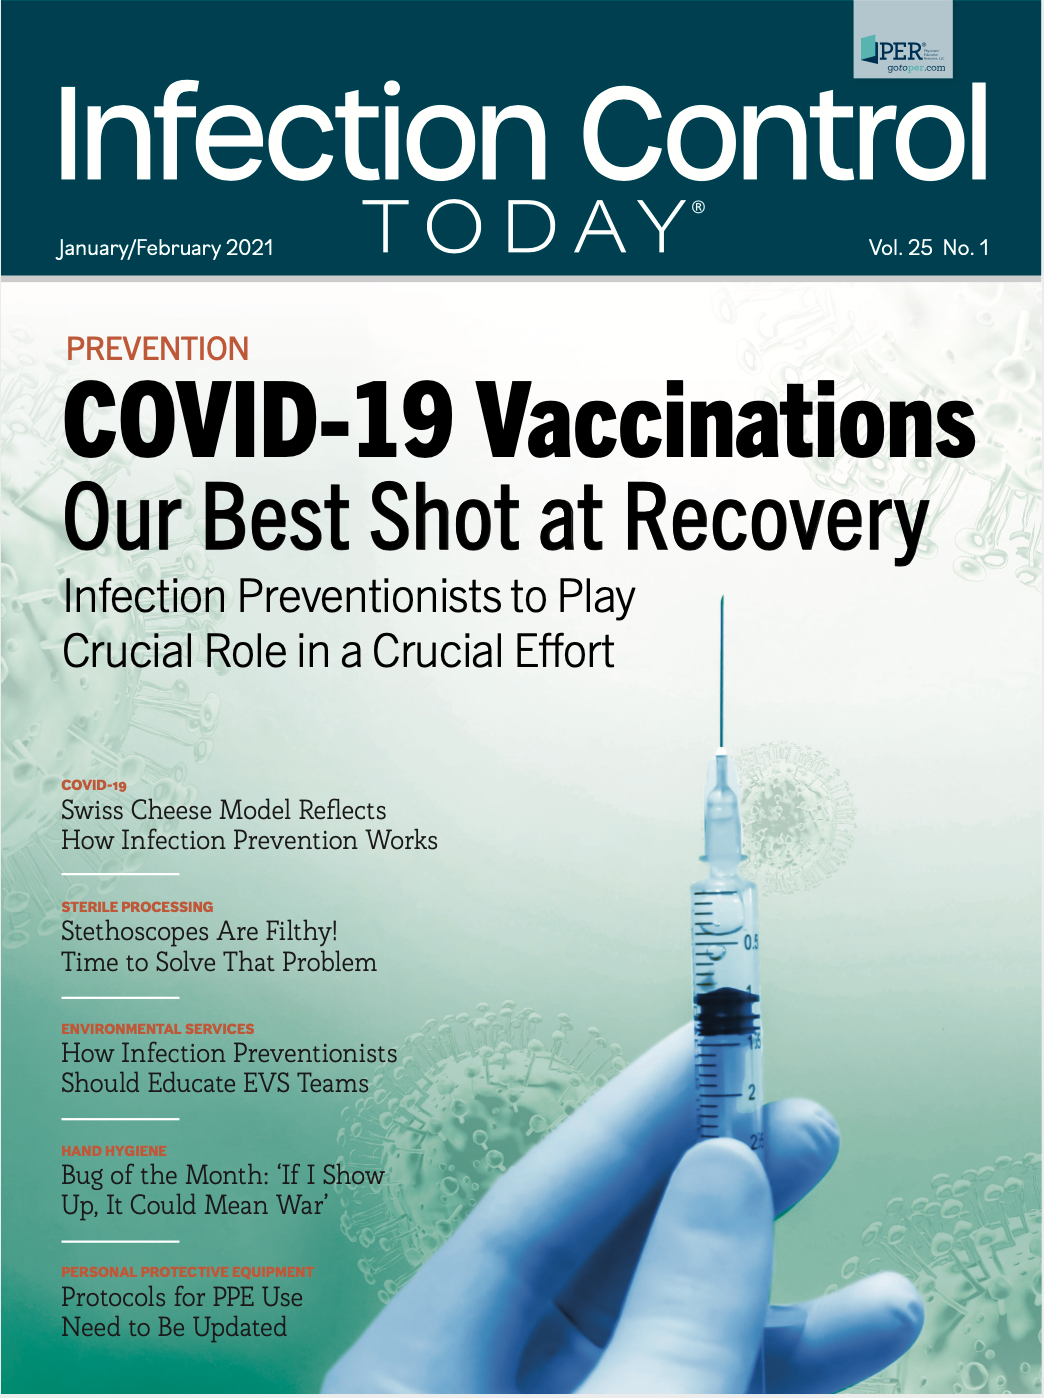 Infection Control Today, January/February 2021 (Vol. 25 No. 1)